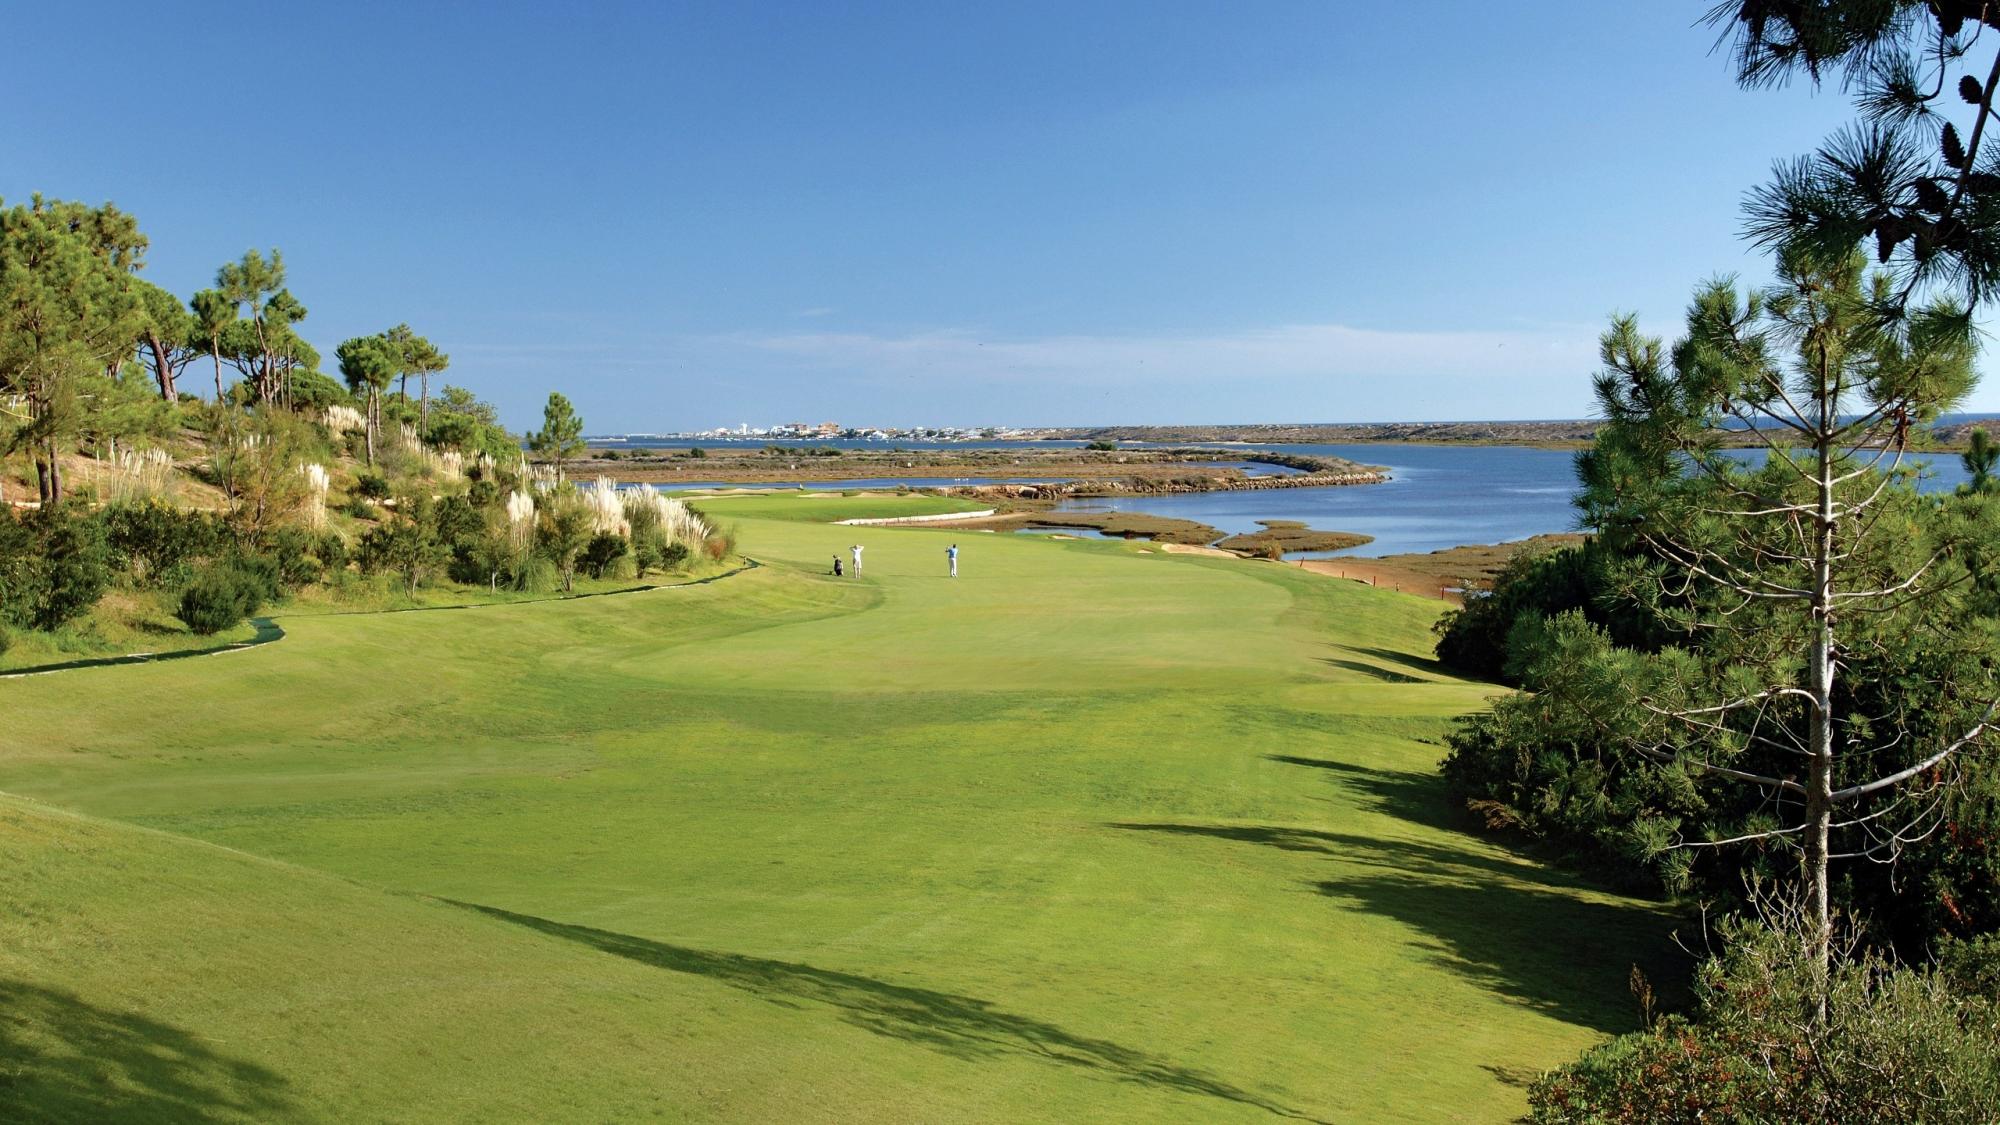 The Bonalba Golf Course's beautiful golf course situated in marvelous Costa Blanca.